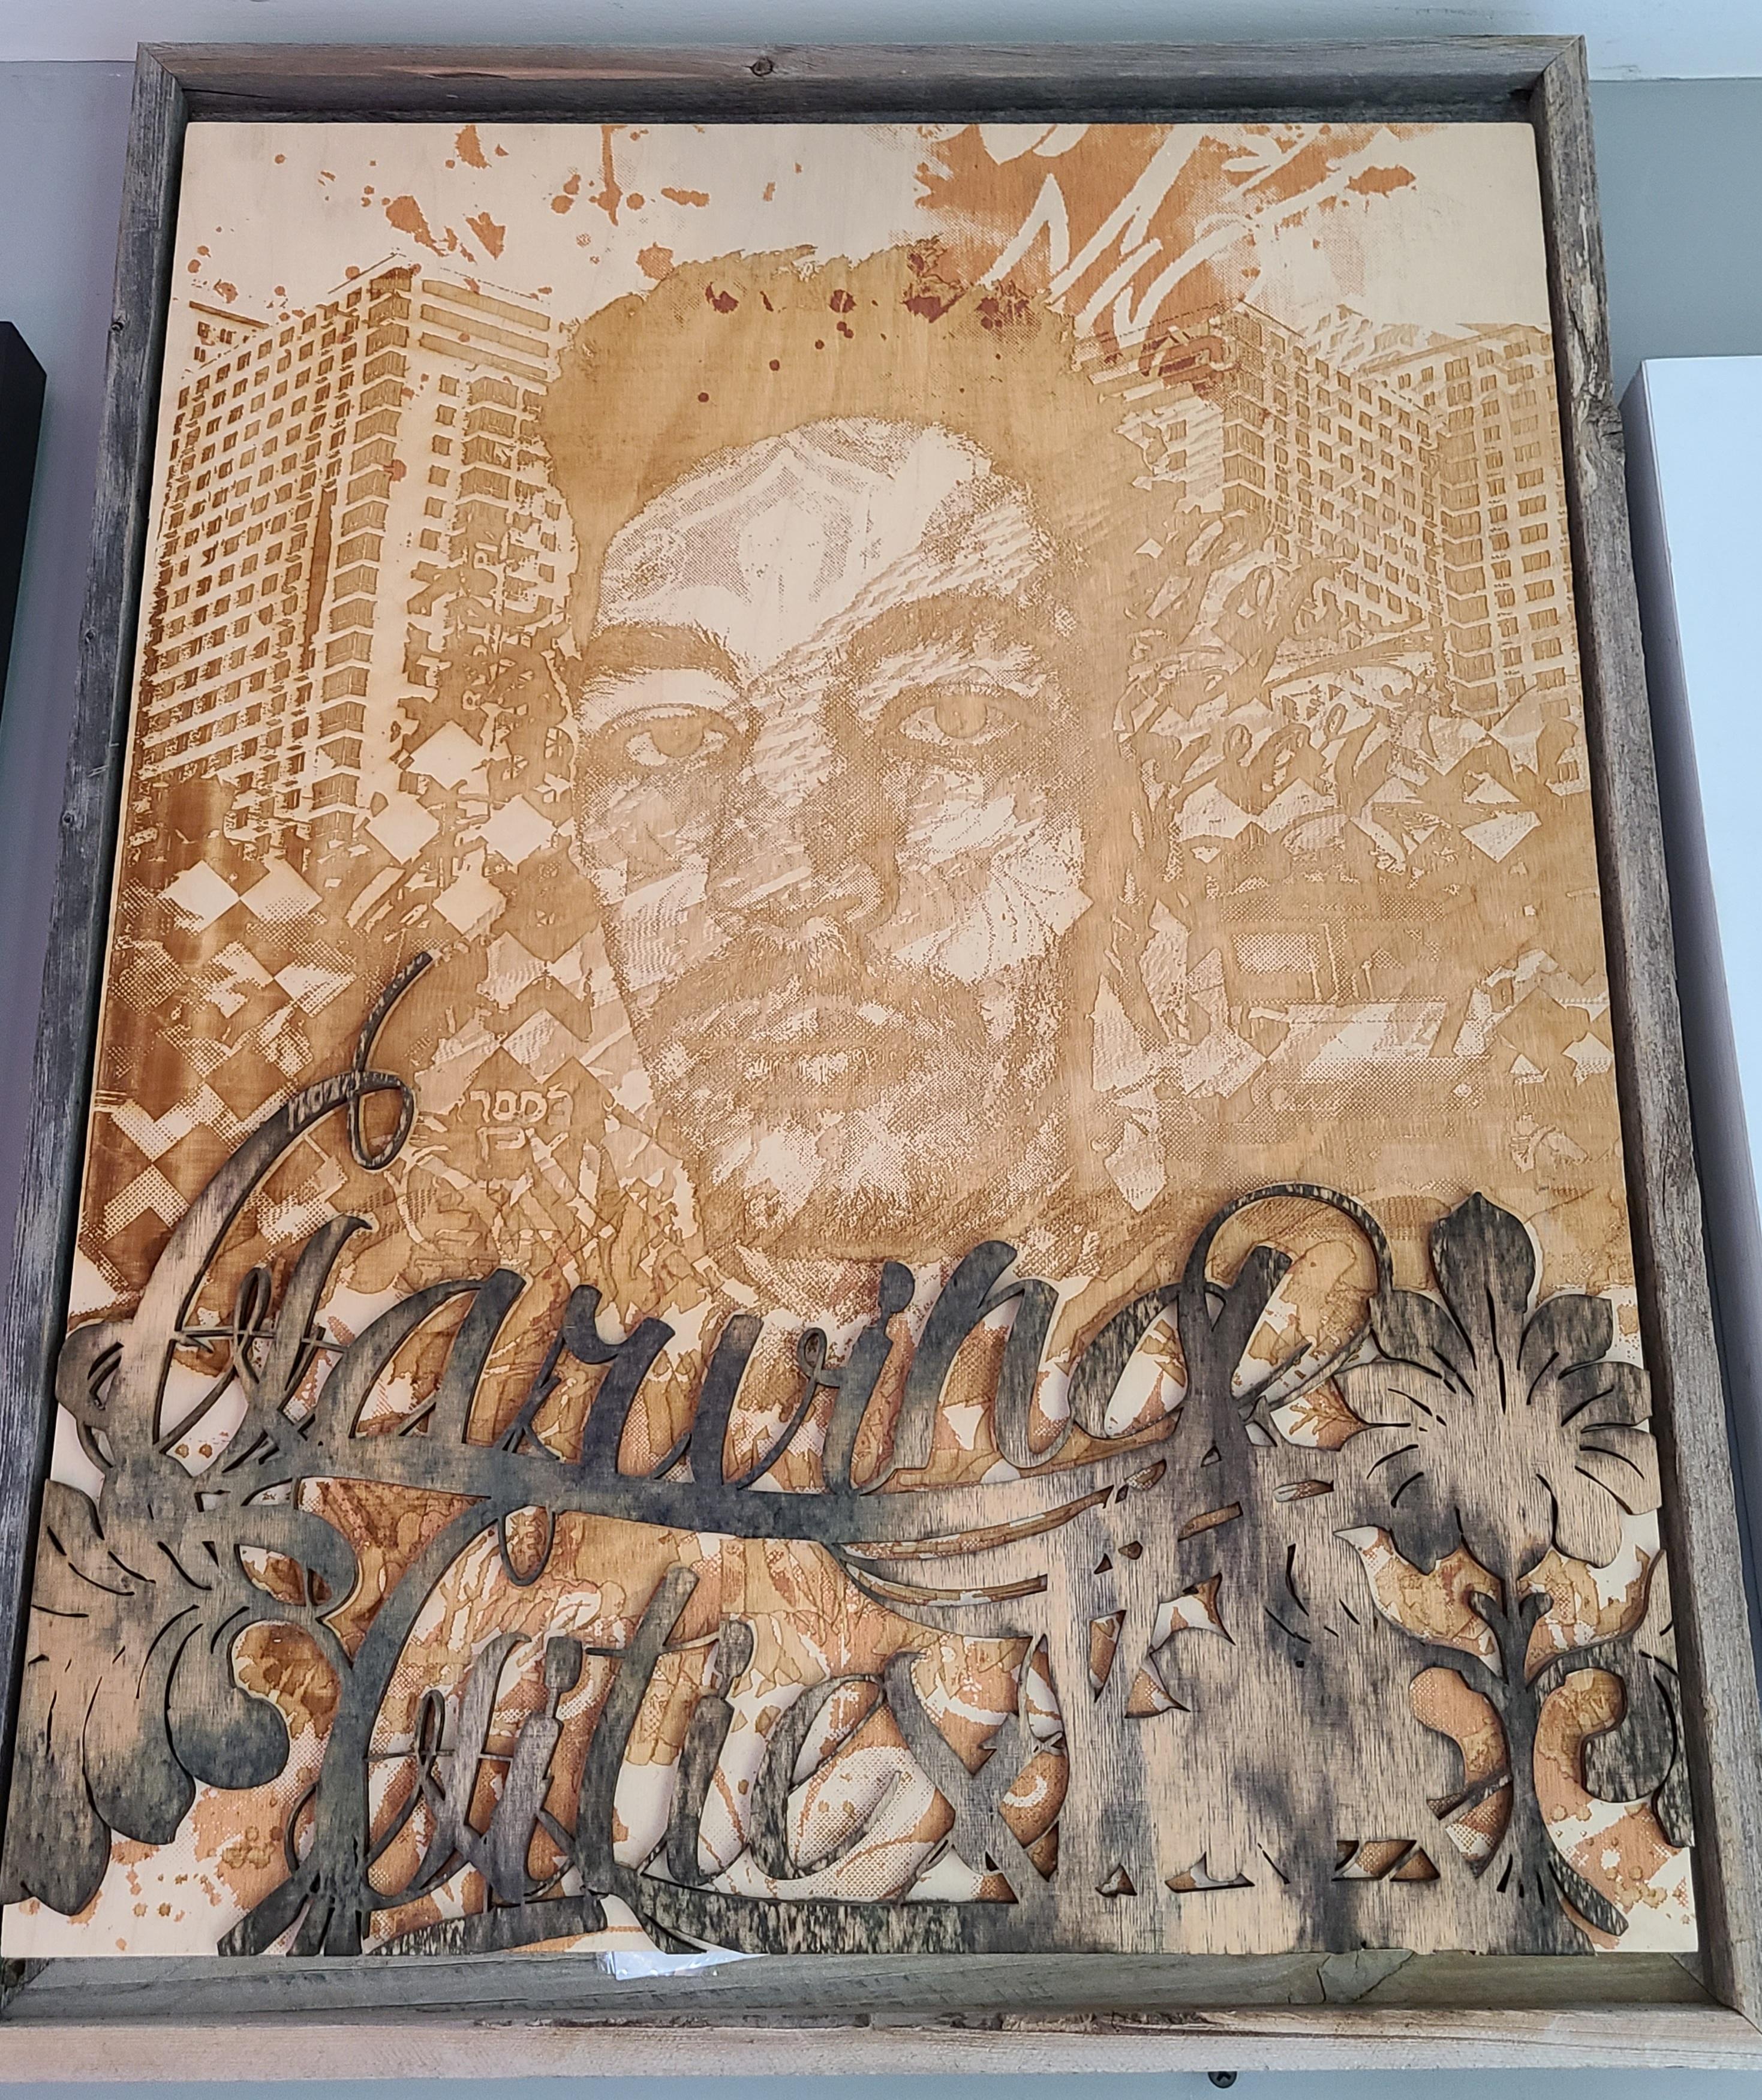 Carving Cities - Mixed Media Art by Alexandre (Vhils) Farto